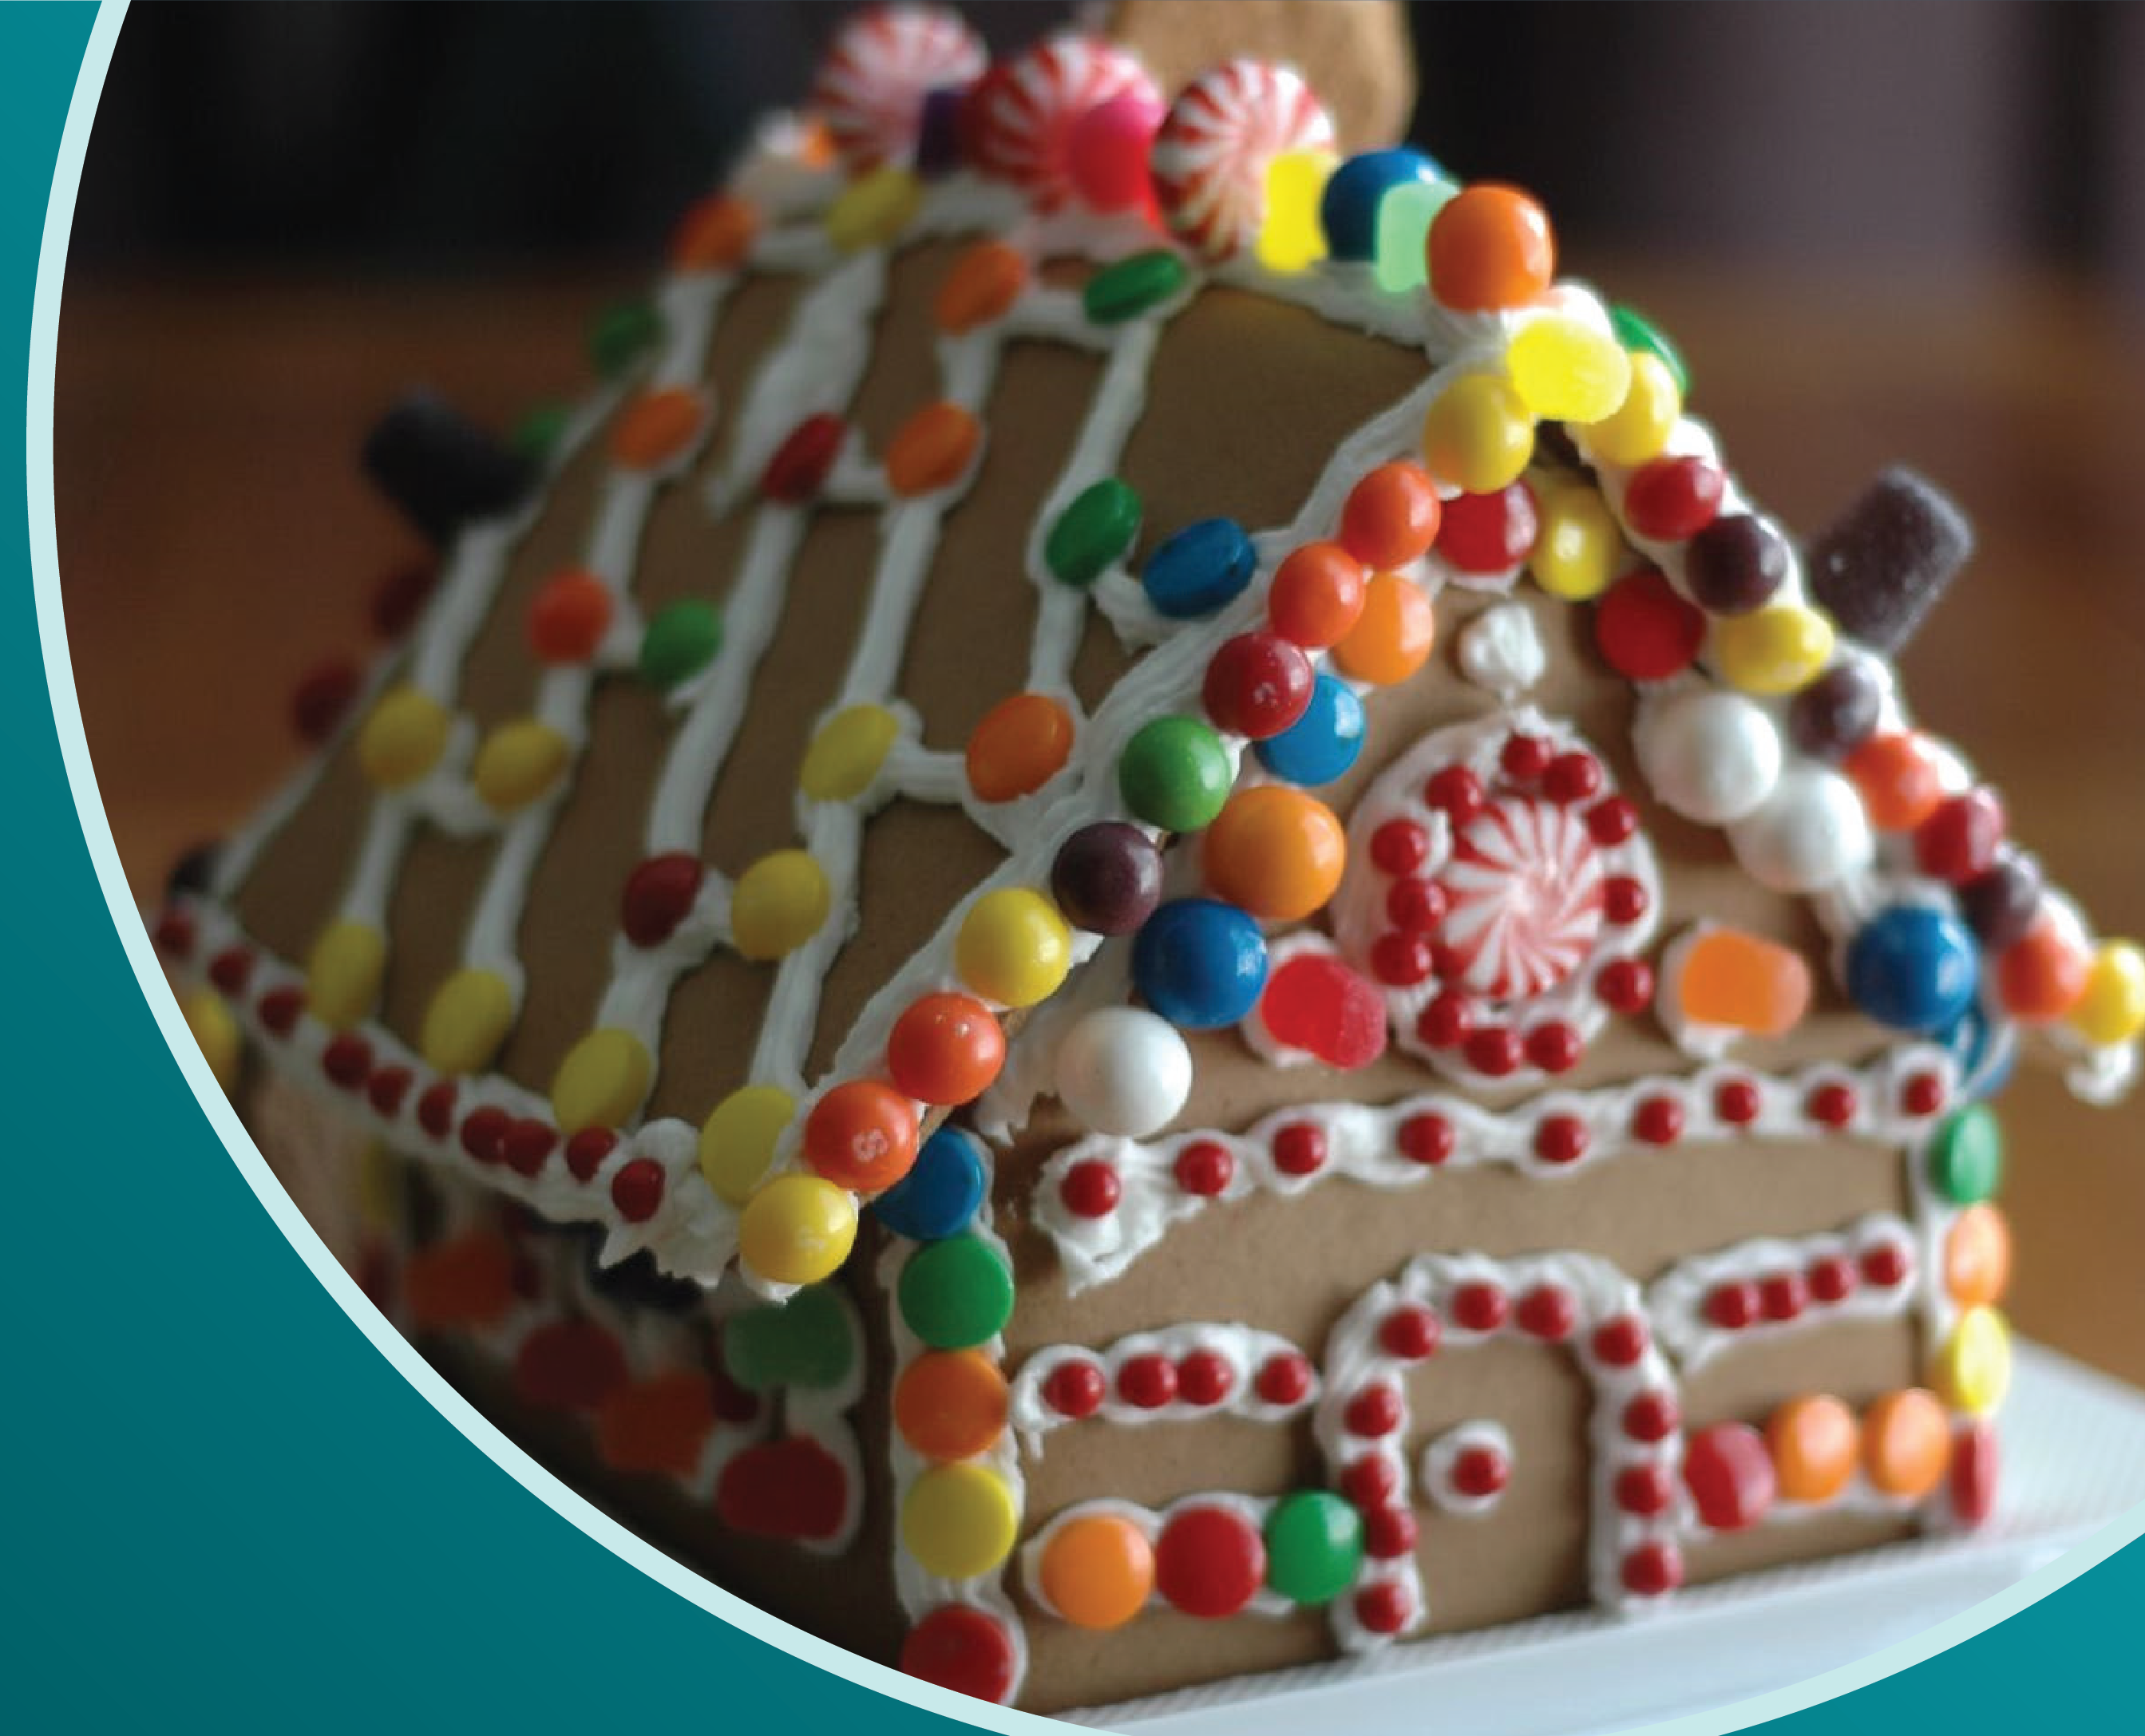 Registration now open for Museum of the Albemarle’s Gingerbread Workshop on Dec. 2